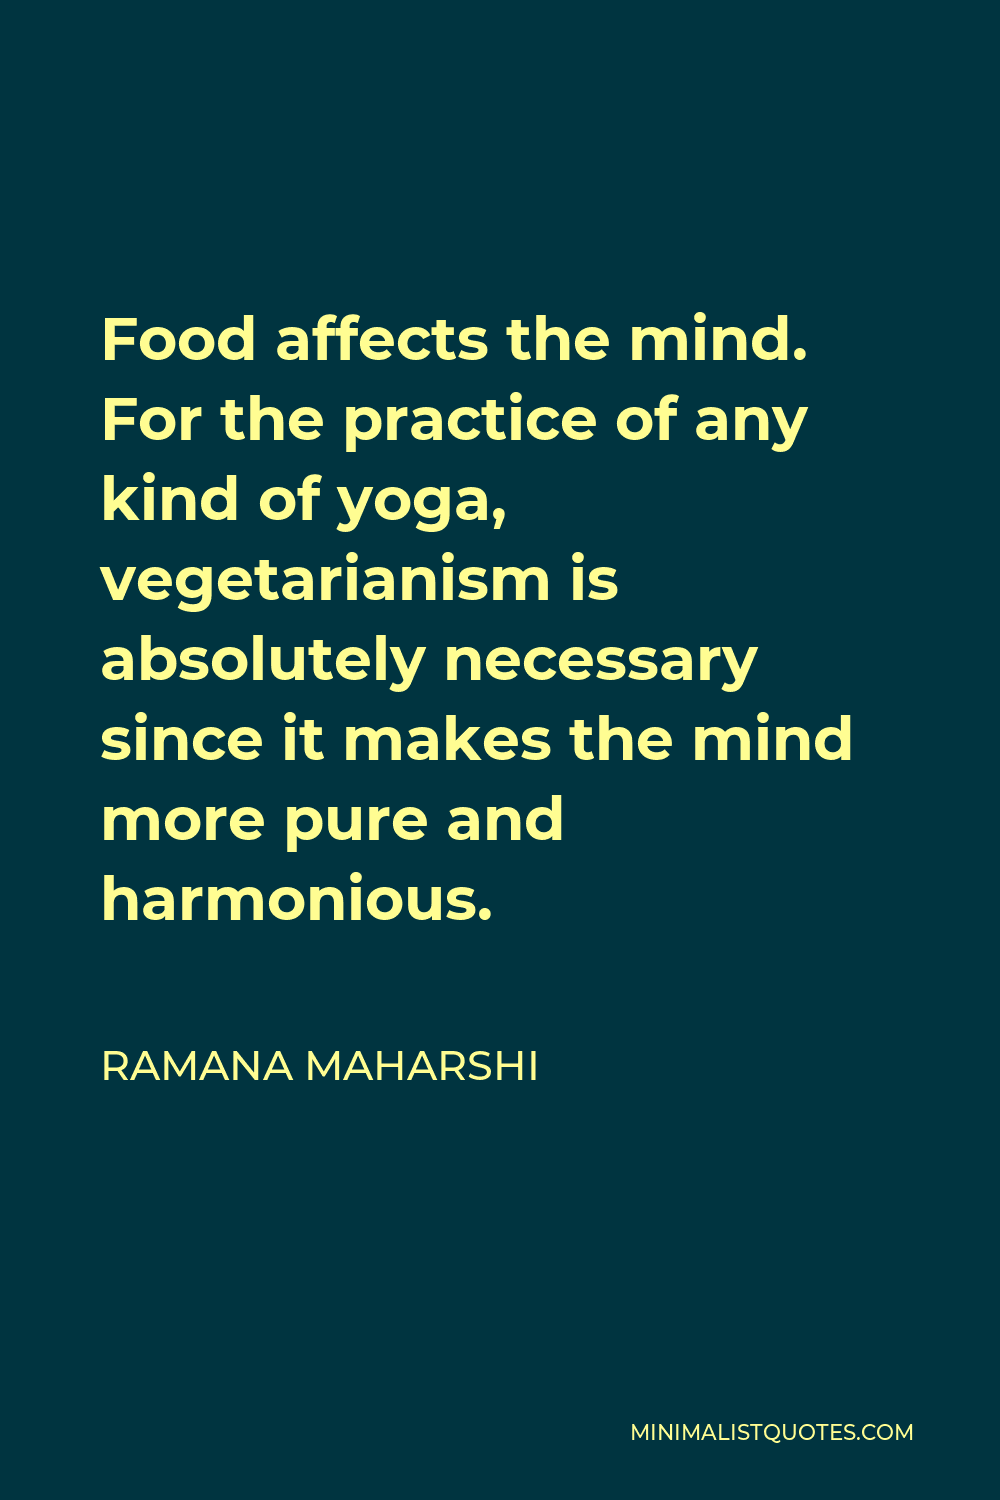 Ramana Maharshi Quote - Food affects the mind. For the practice of any kind of yoga, vegetarianism is absolutely necessary since it makes the mind more pure and harmonious.